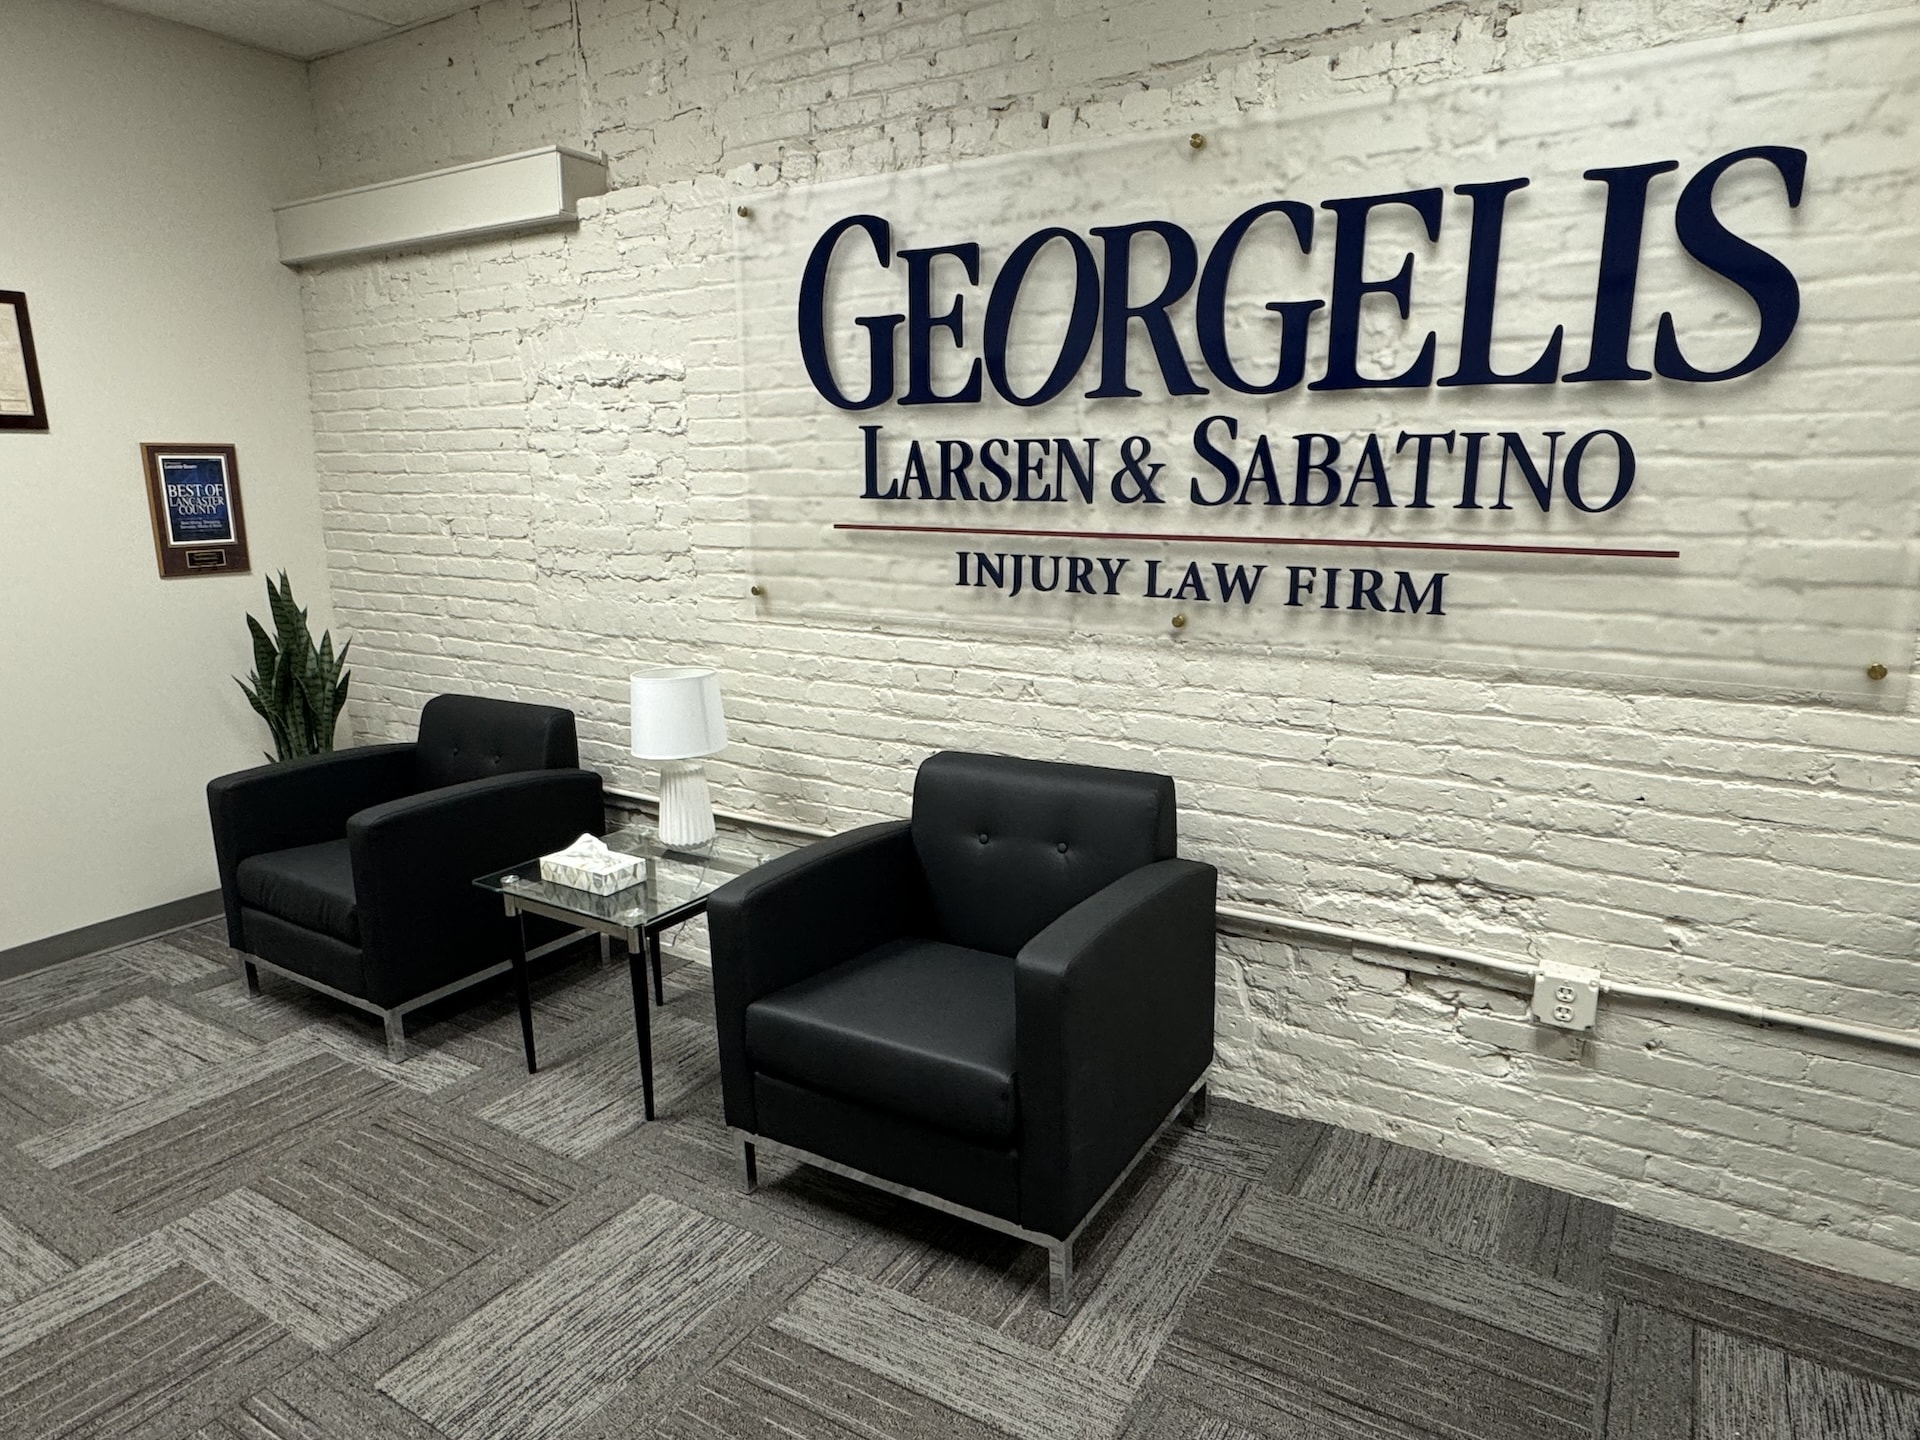 Exciting News: Our New Office in the Heart of Lancaster City, Pennsylvania is Now Open to Better Serve You! - Georgelis, Larsen & Sabatino Injury Law Firm